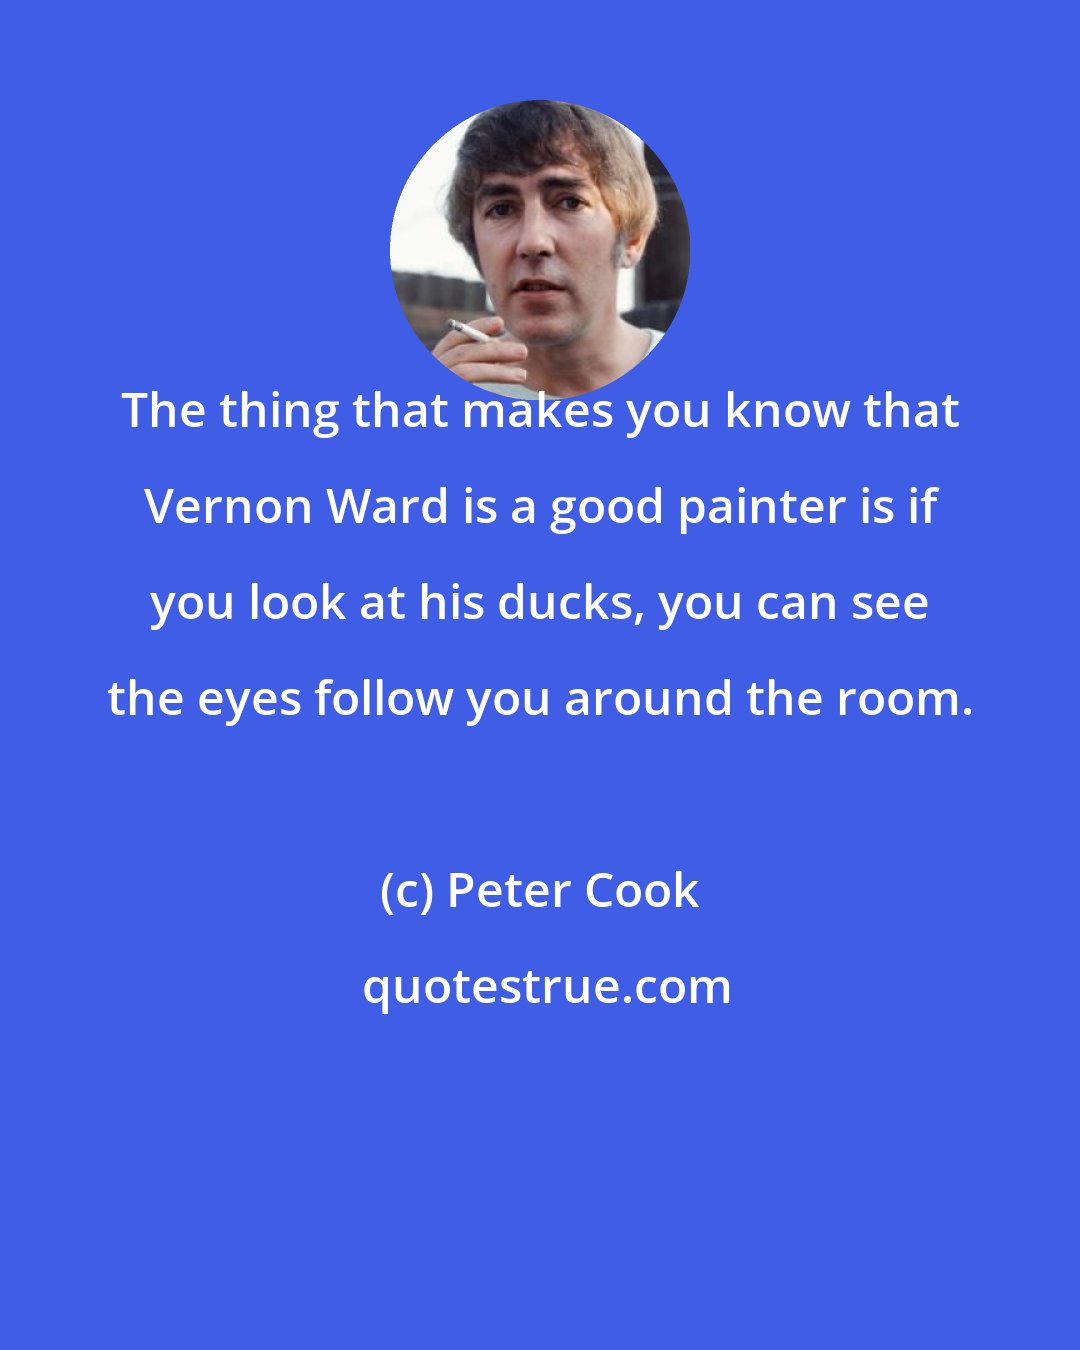 Peter Cook: The thing that makes you know that Vernon Ward is a good painter is if you look at his ducks, you can see the eyes follow you around the room.